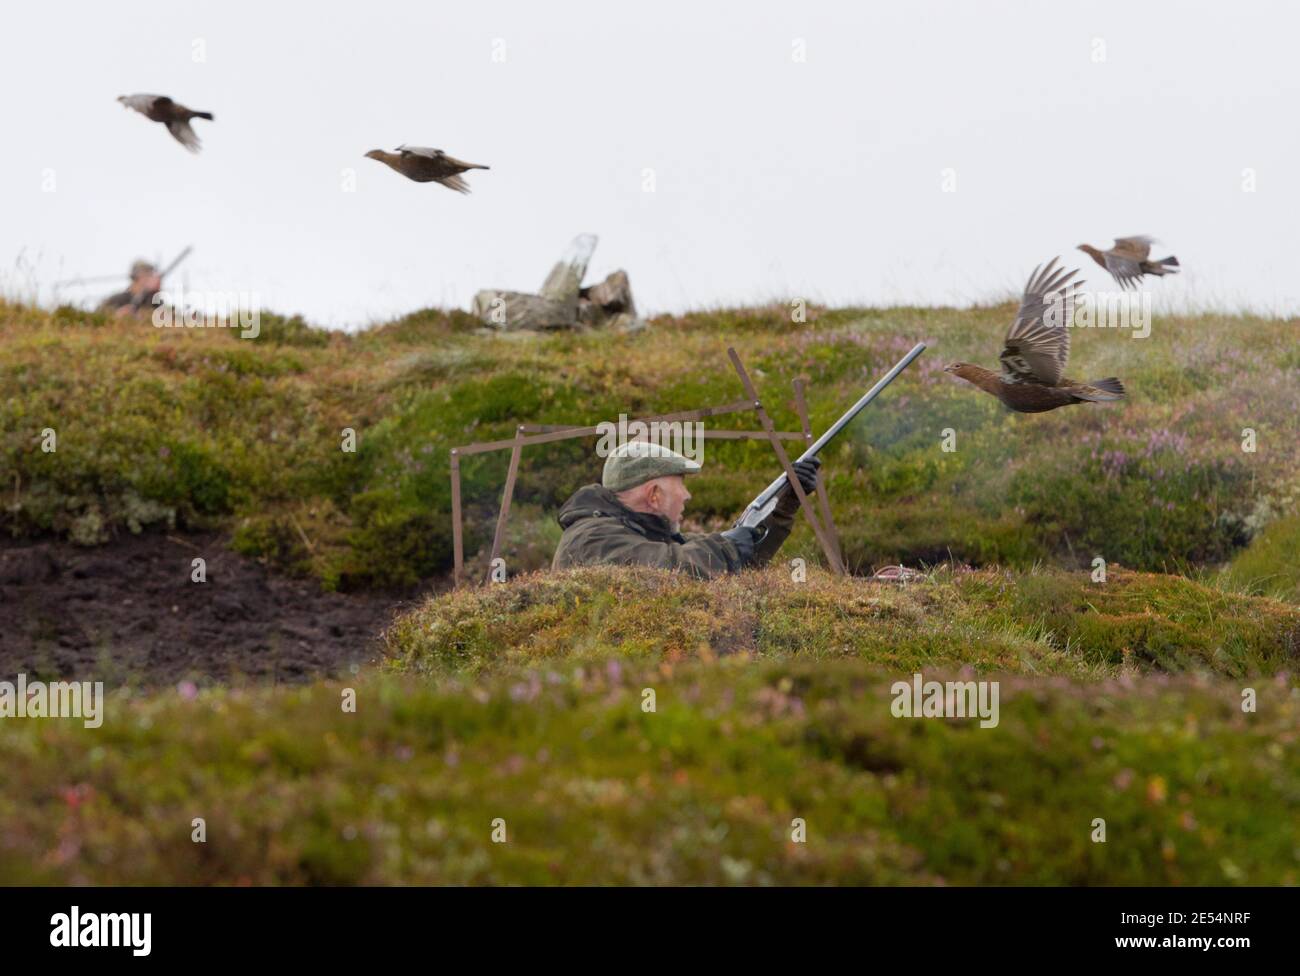 SCOTLAND Perth -- 21 Aug 2014 -- Alex Seldon shoots a Red Grouse during a grouse shoot on the Glenturret Esate near Crieff in Perthshire, Scotland, UK Stock Photo